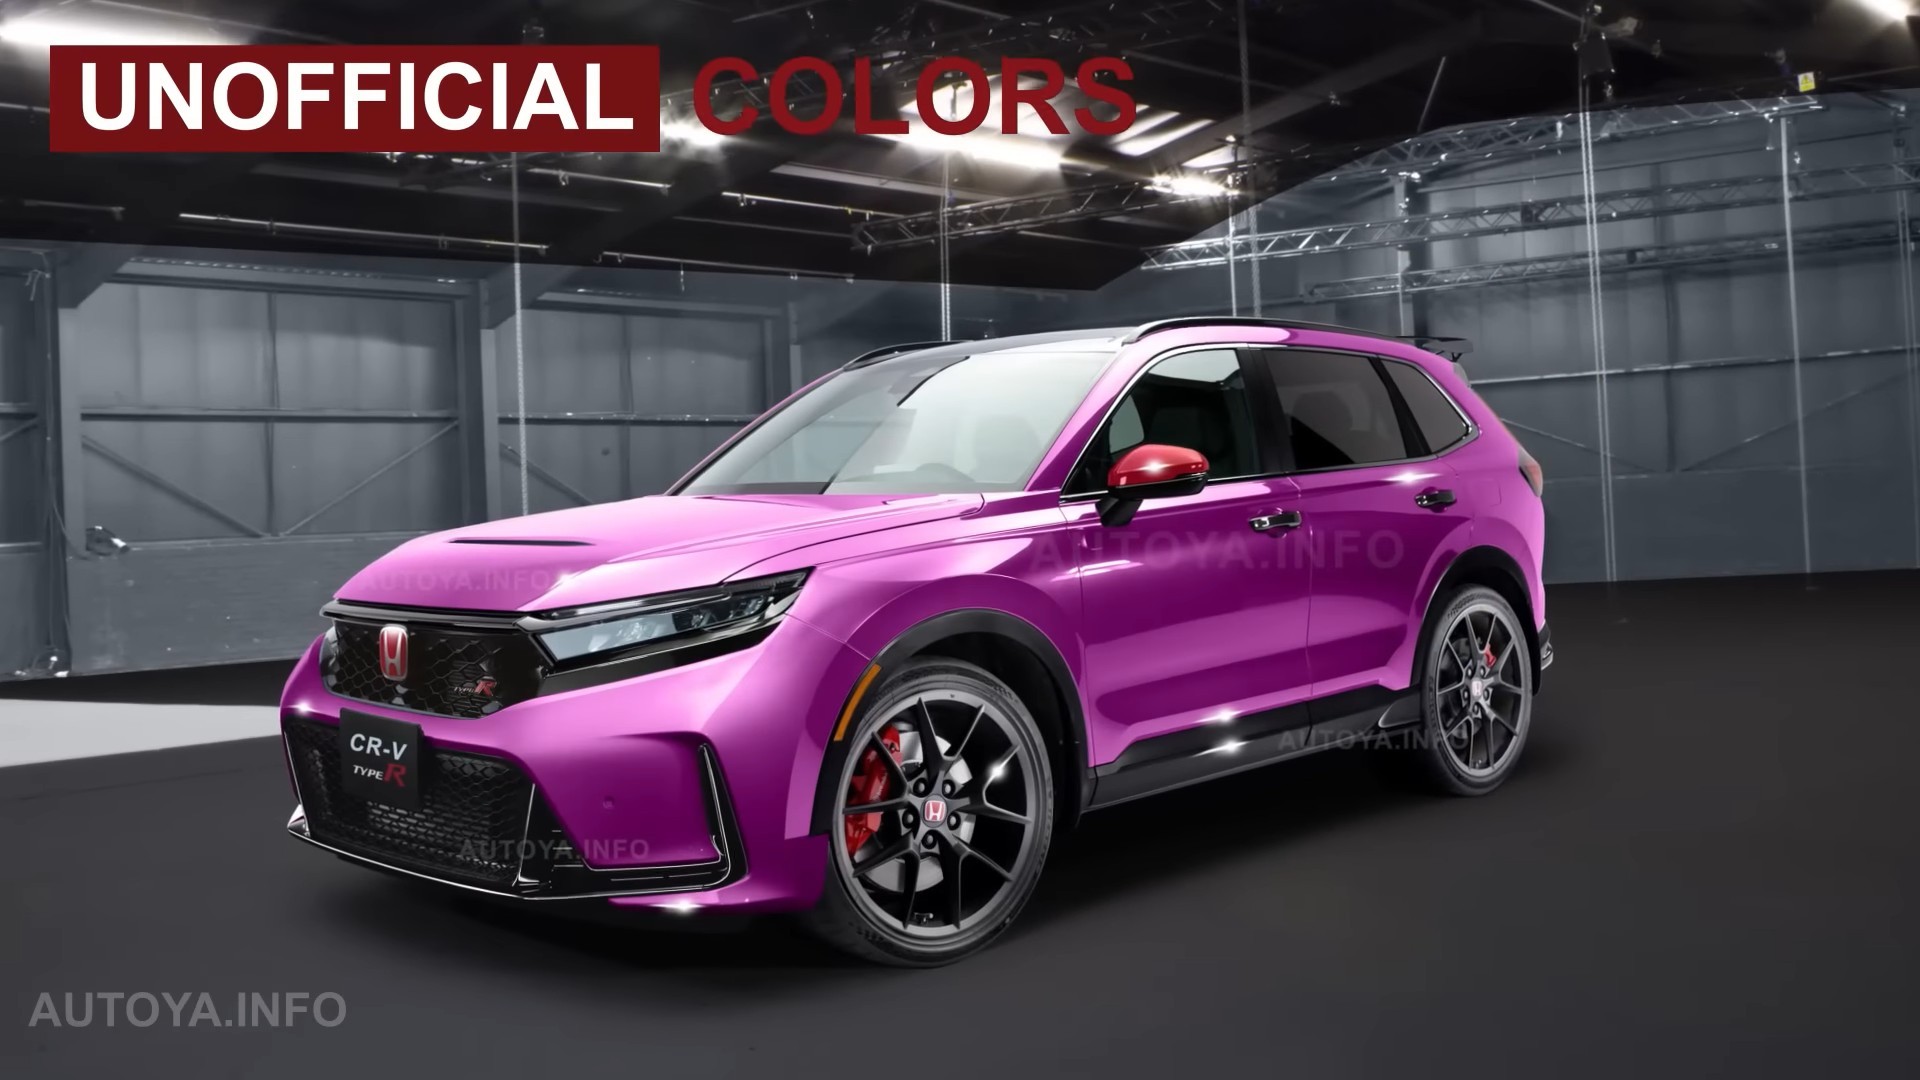 2024 Honda CR-V Type R Digitally Aims for Most Powerful and Fastest SUV